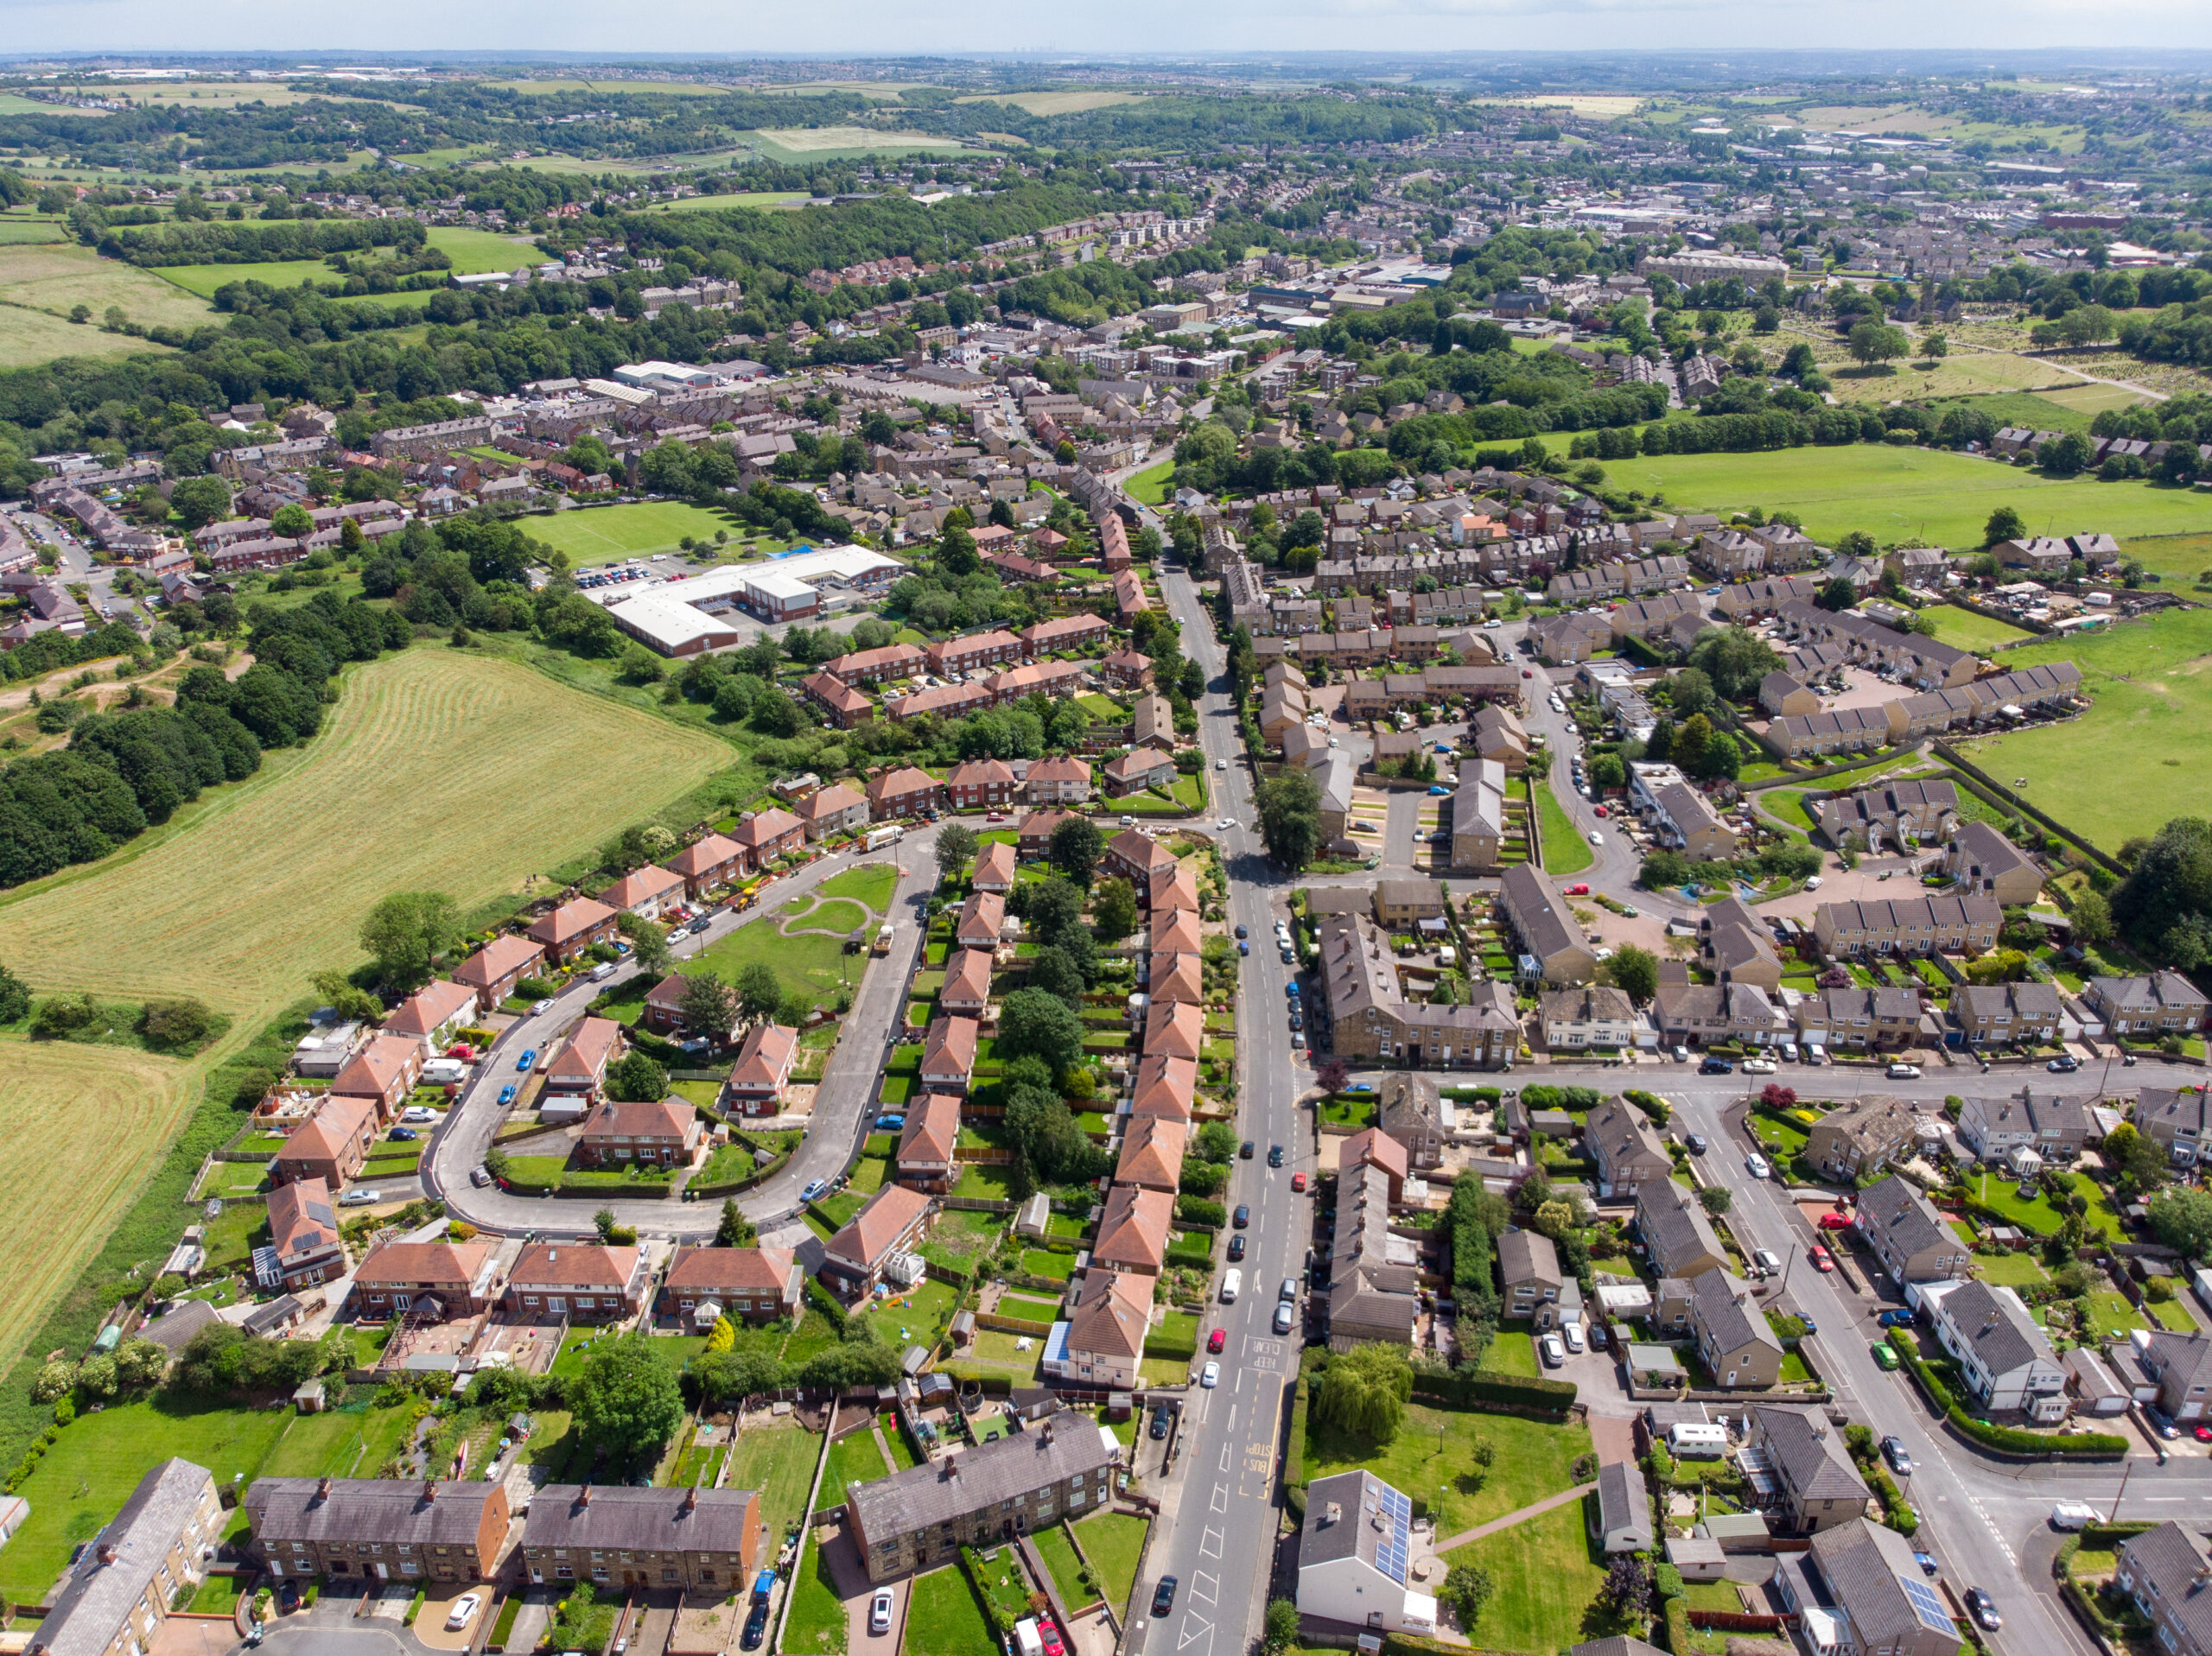 Aerial photo of the town of Batley in Yorkshire UK, showing a typical British housing estates with roads and streets, taken with a drone on a sunny day above the houses.